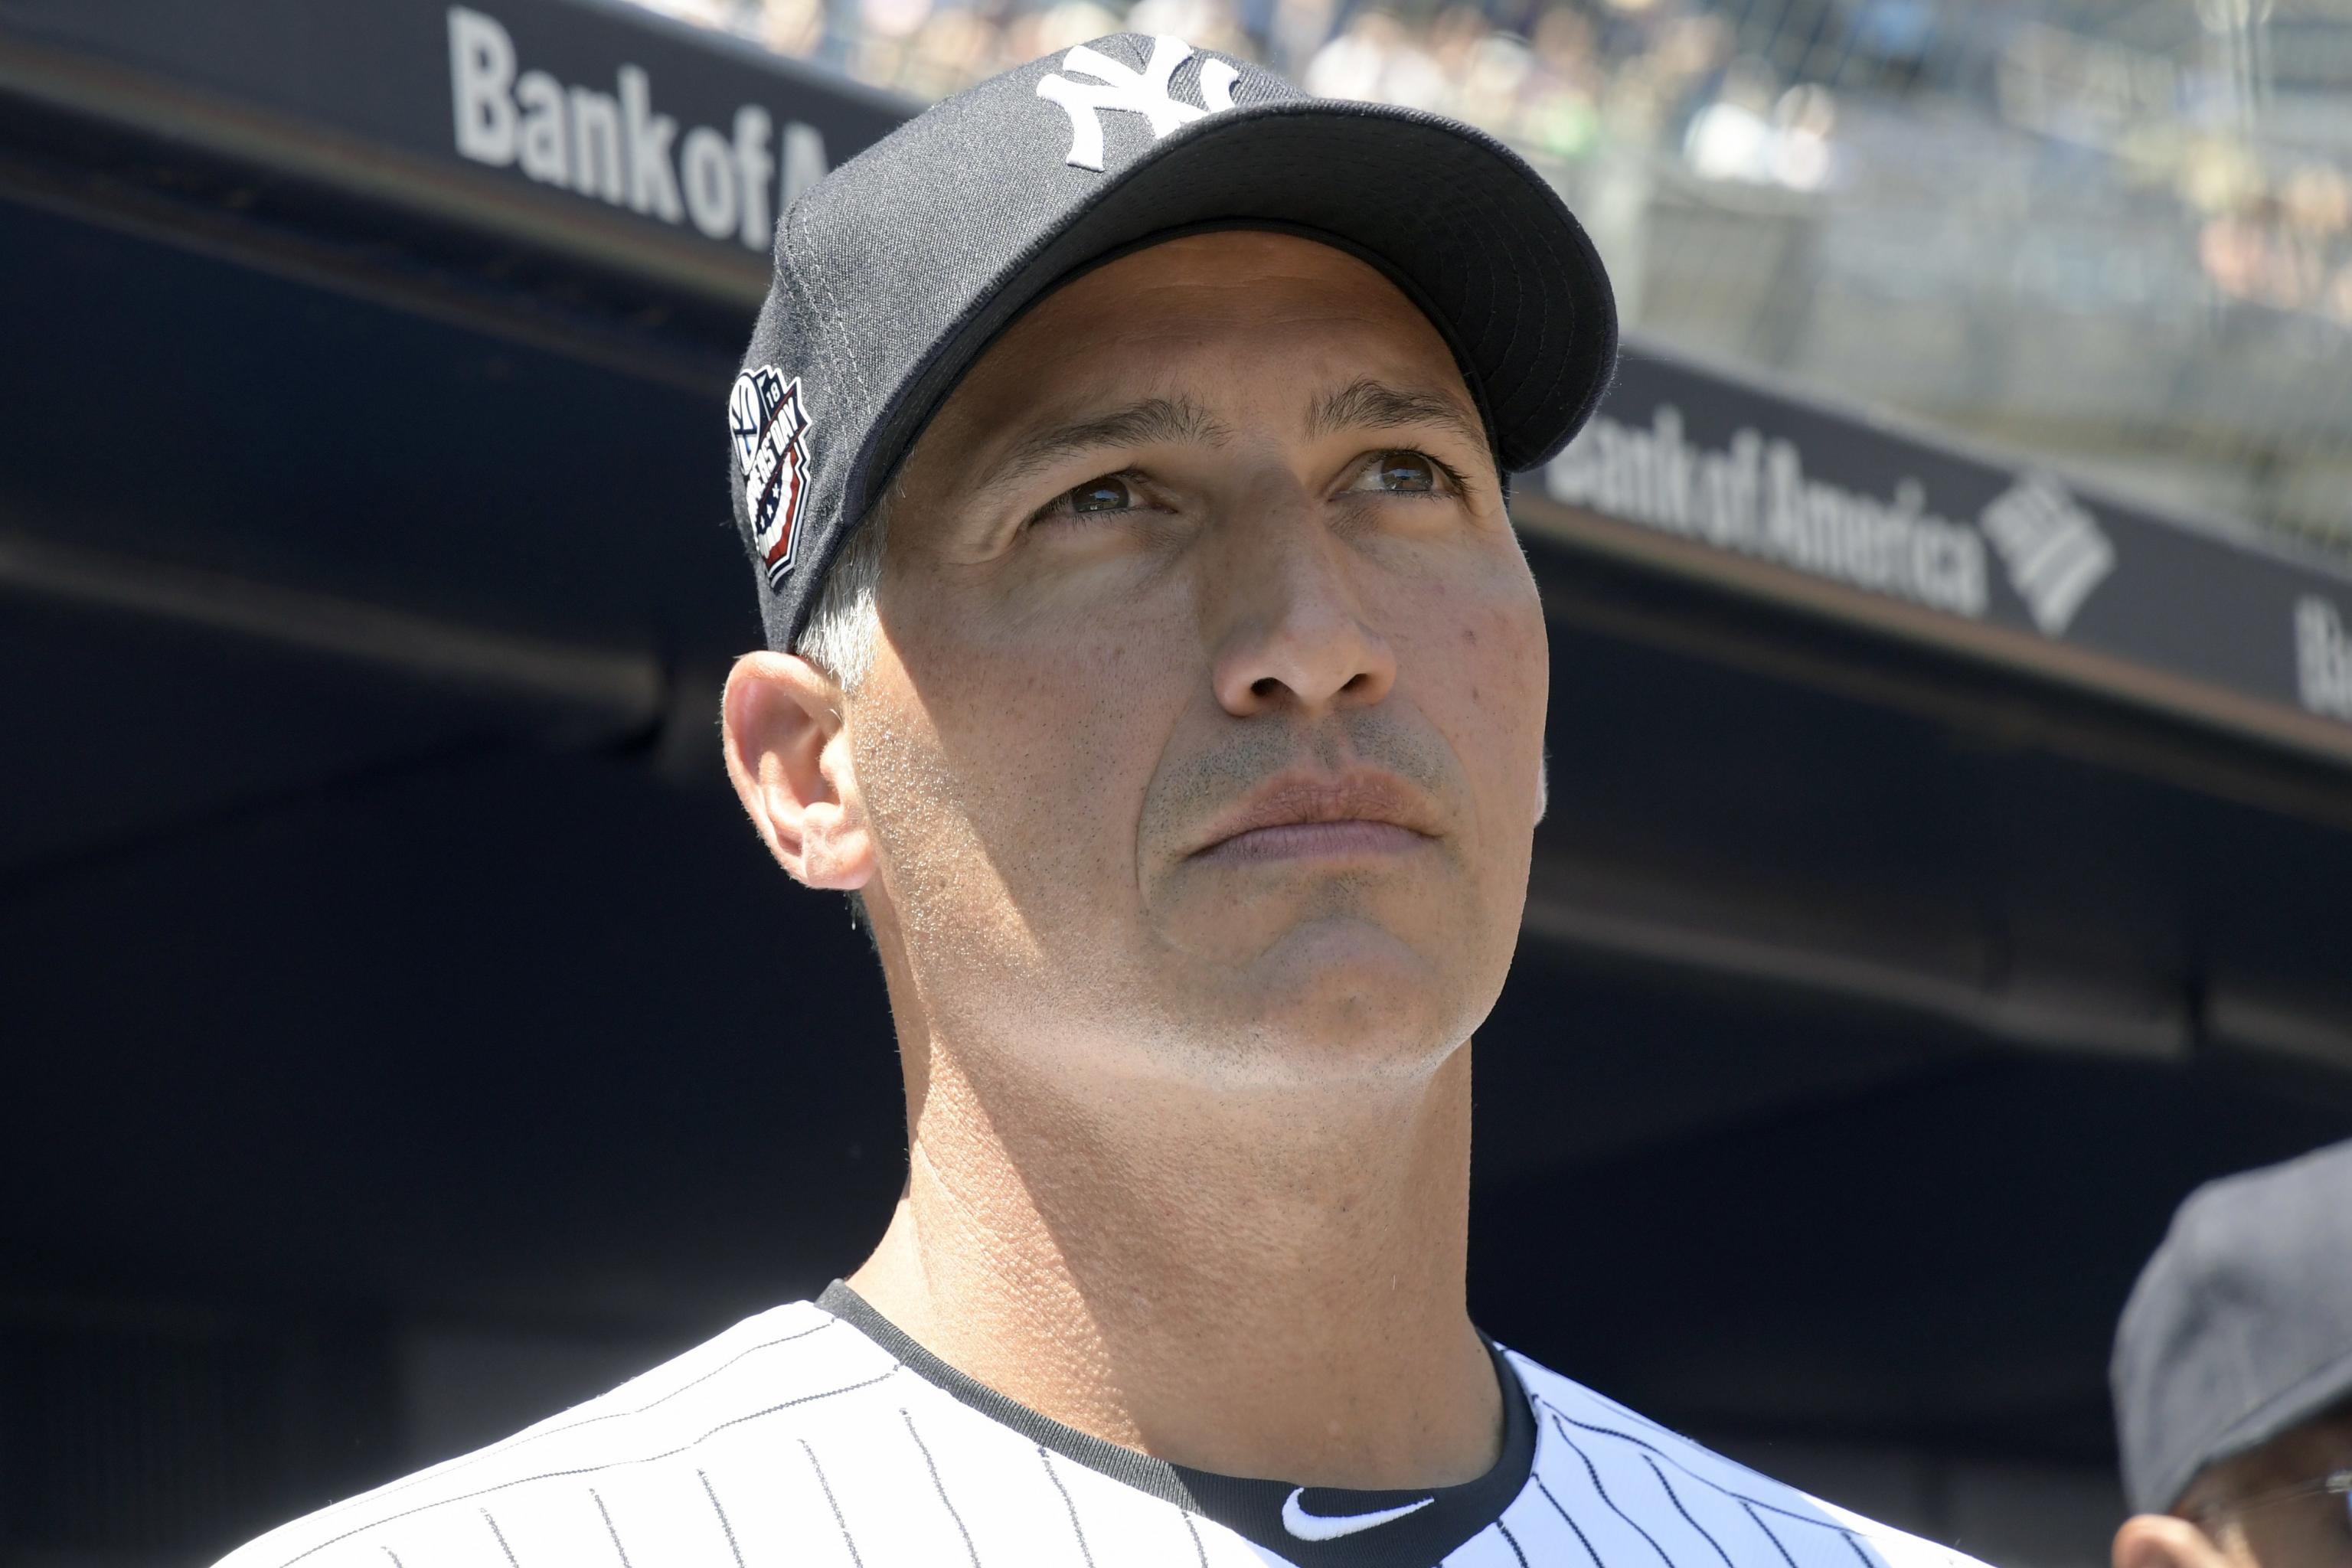 Yankees Hint At A Major Shift With Addition Of Andy Pettitte